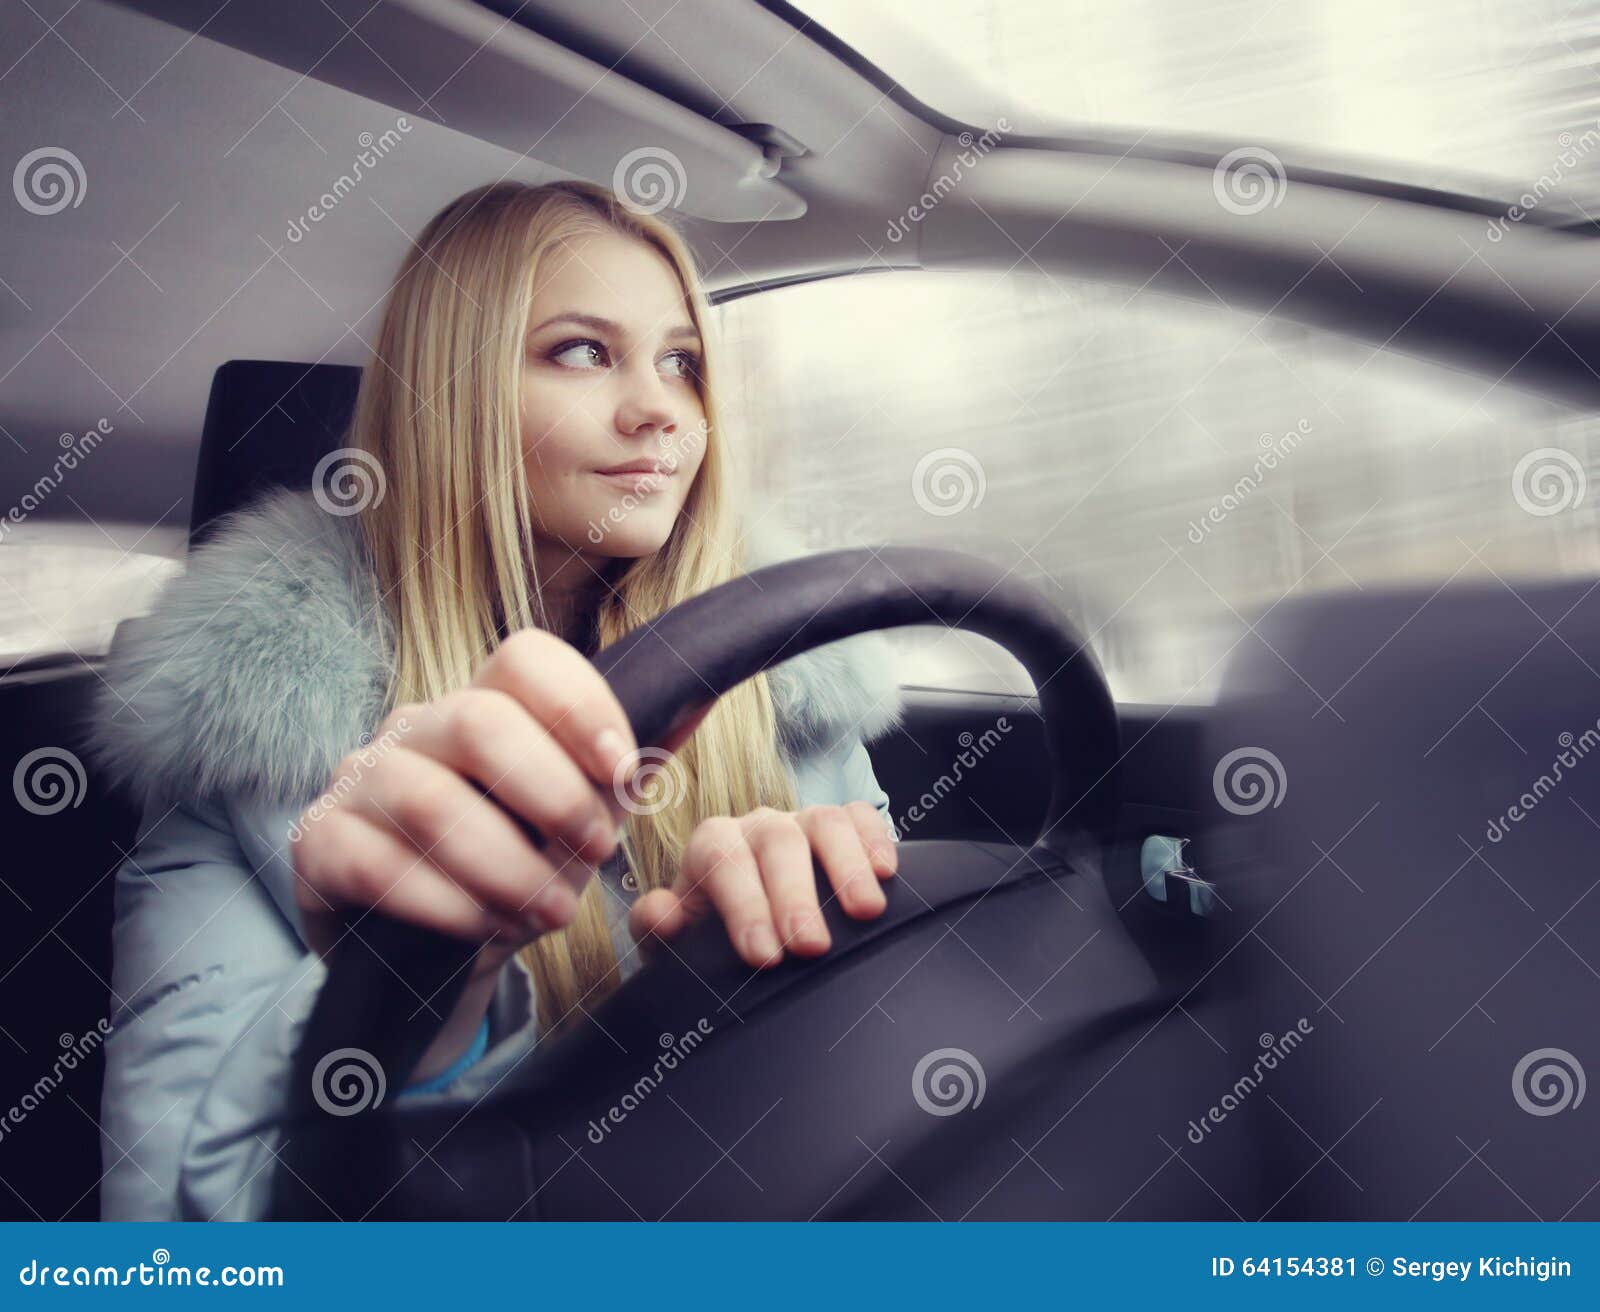 Girl driving a car stock image. Image of behind, adult